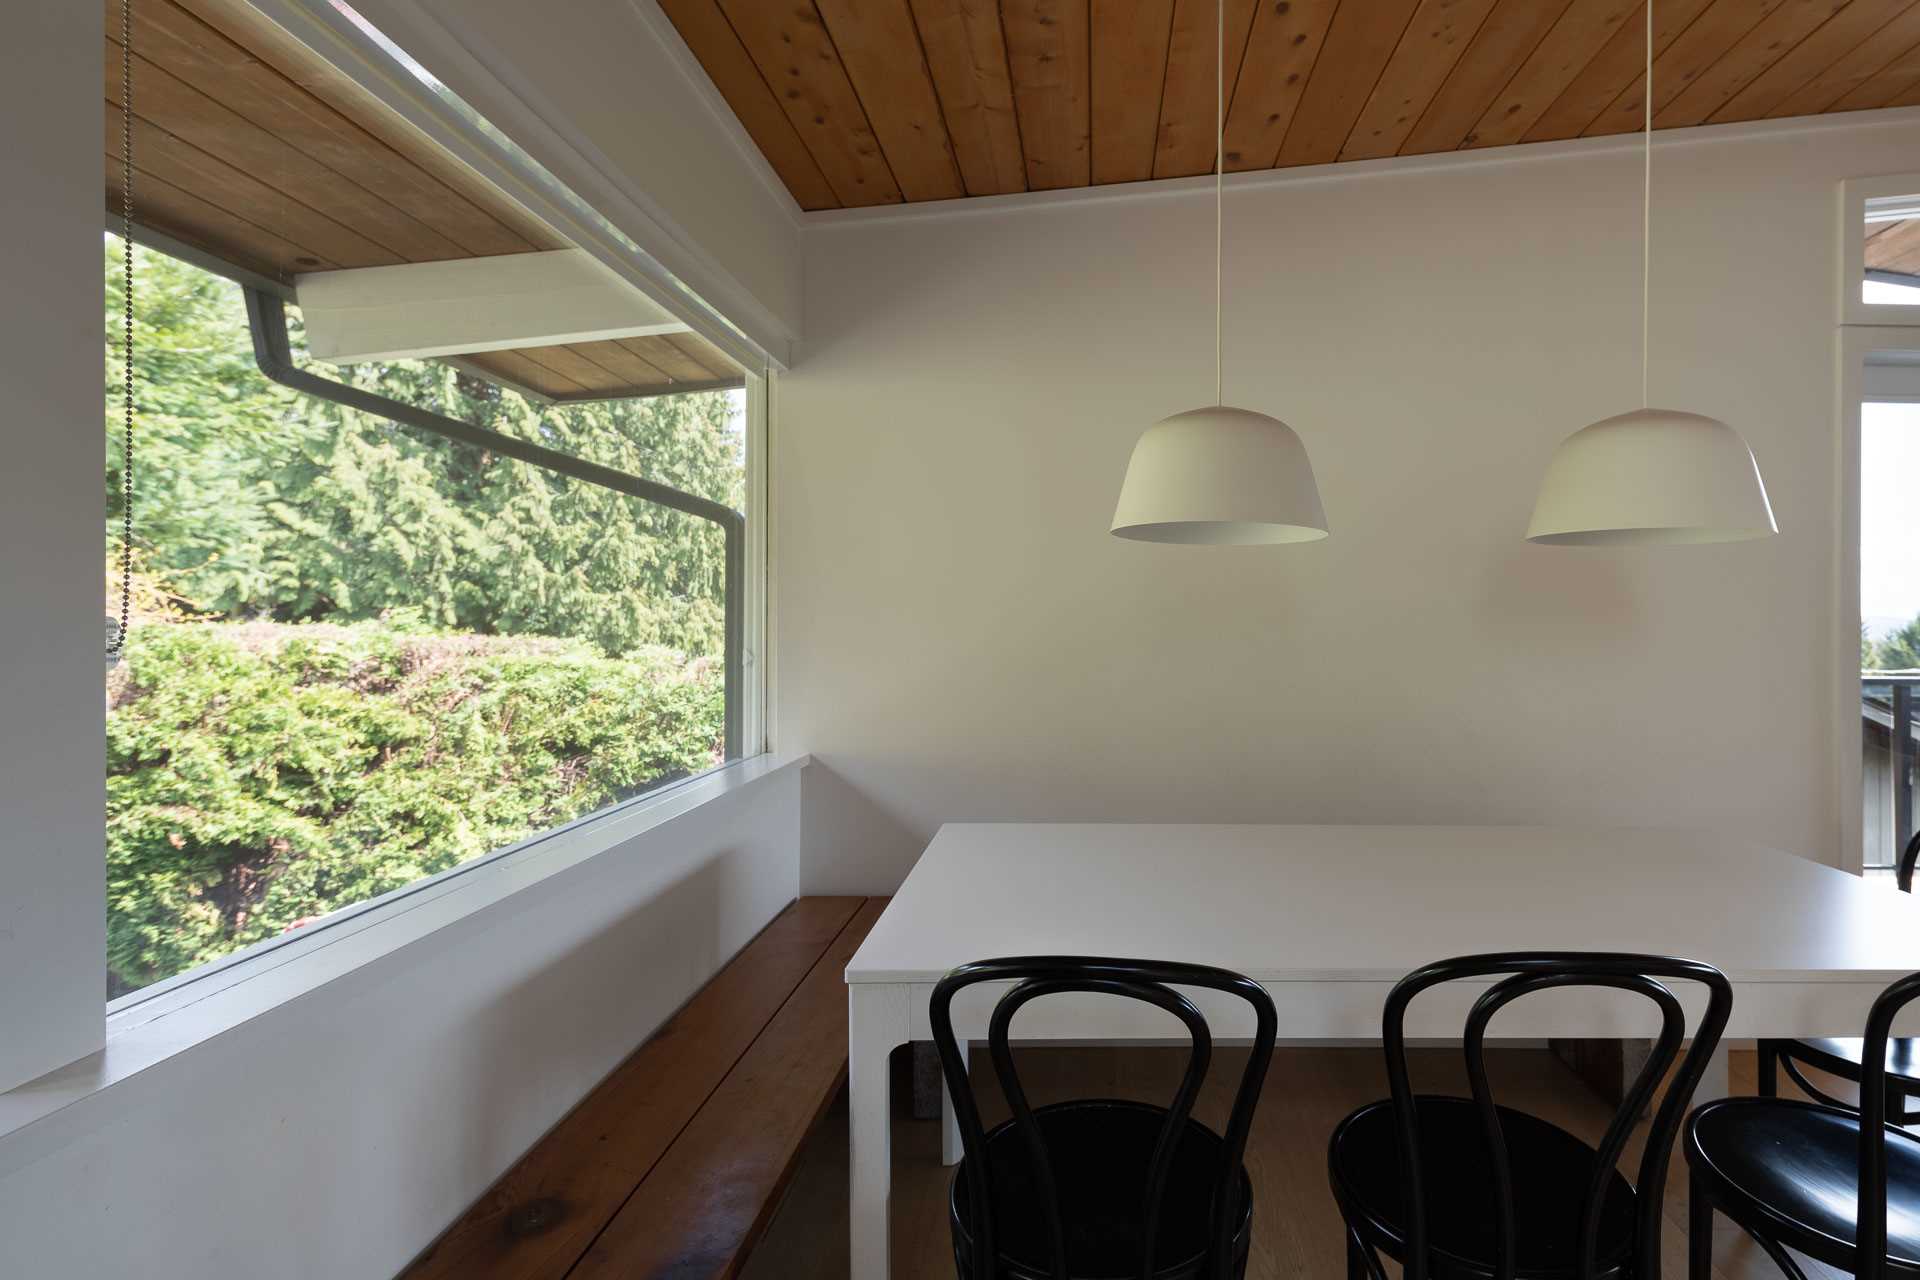 This newly remodeled dining room is open to the living room and kitchen, and now includes two minimalist white pendant lights hanging above a simple white table.